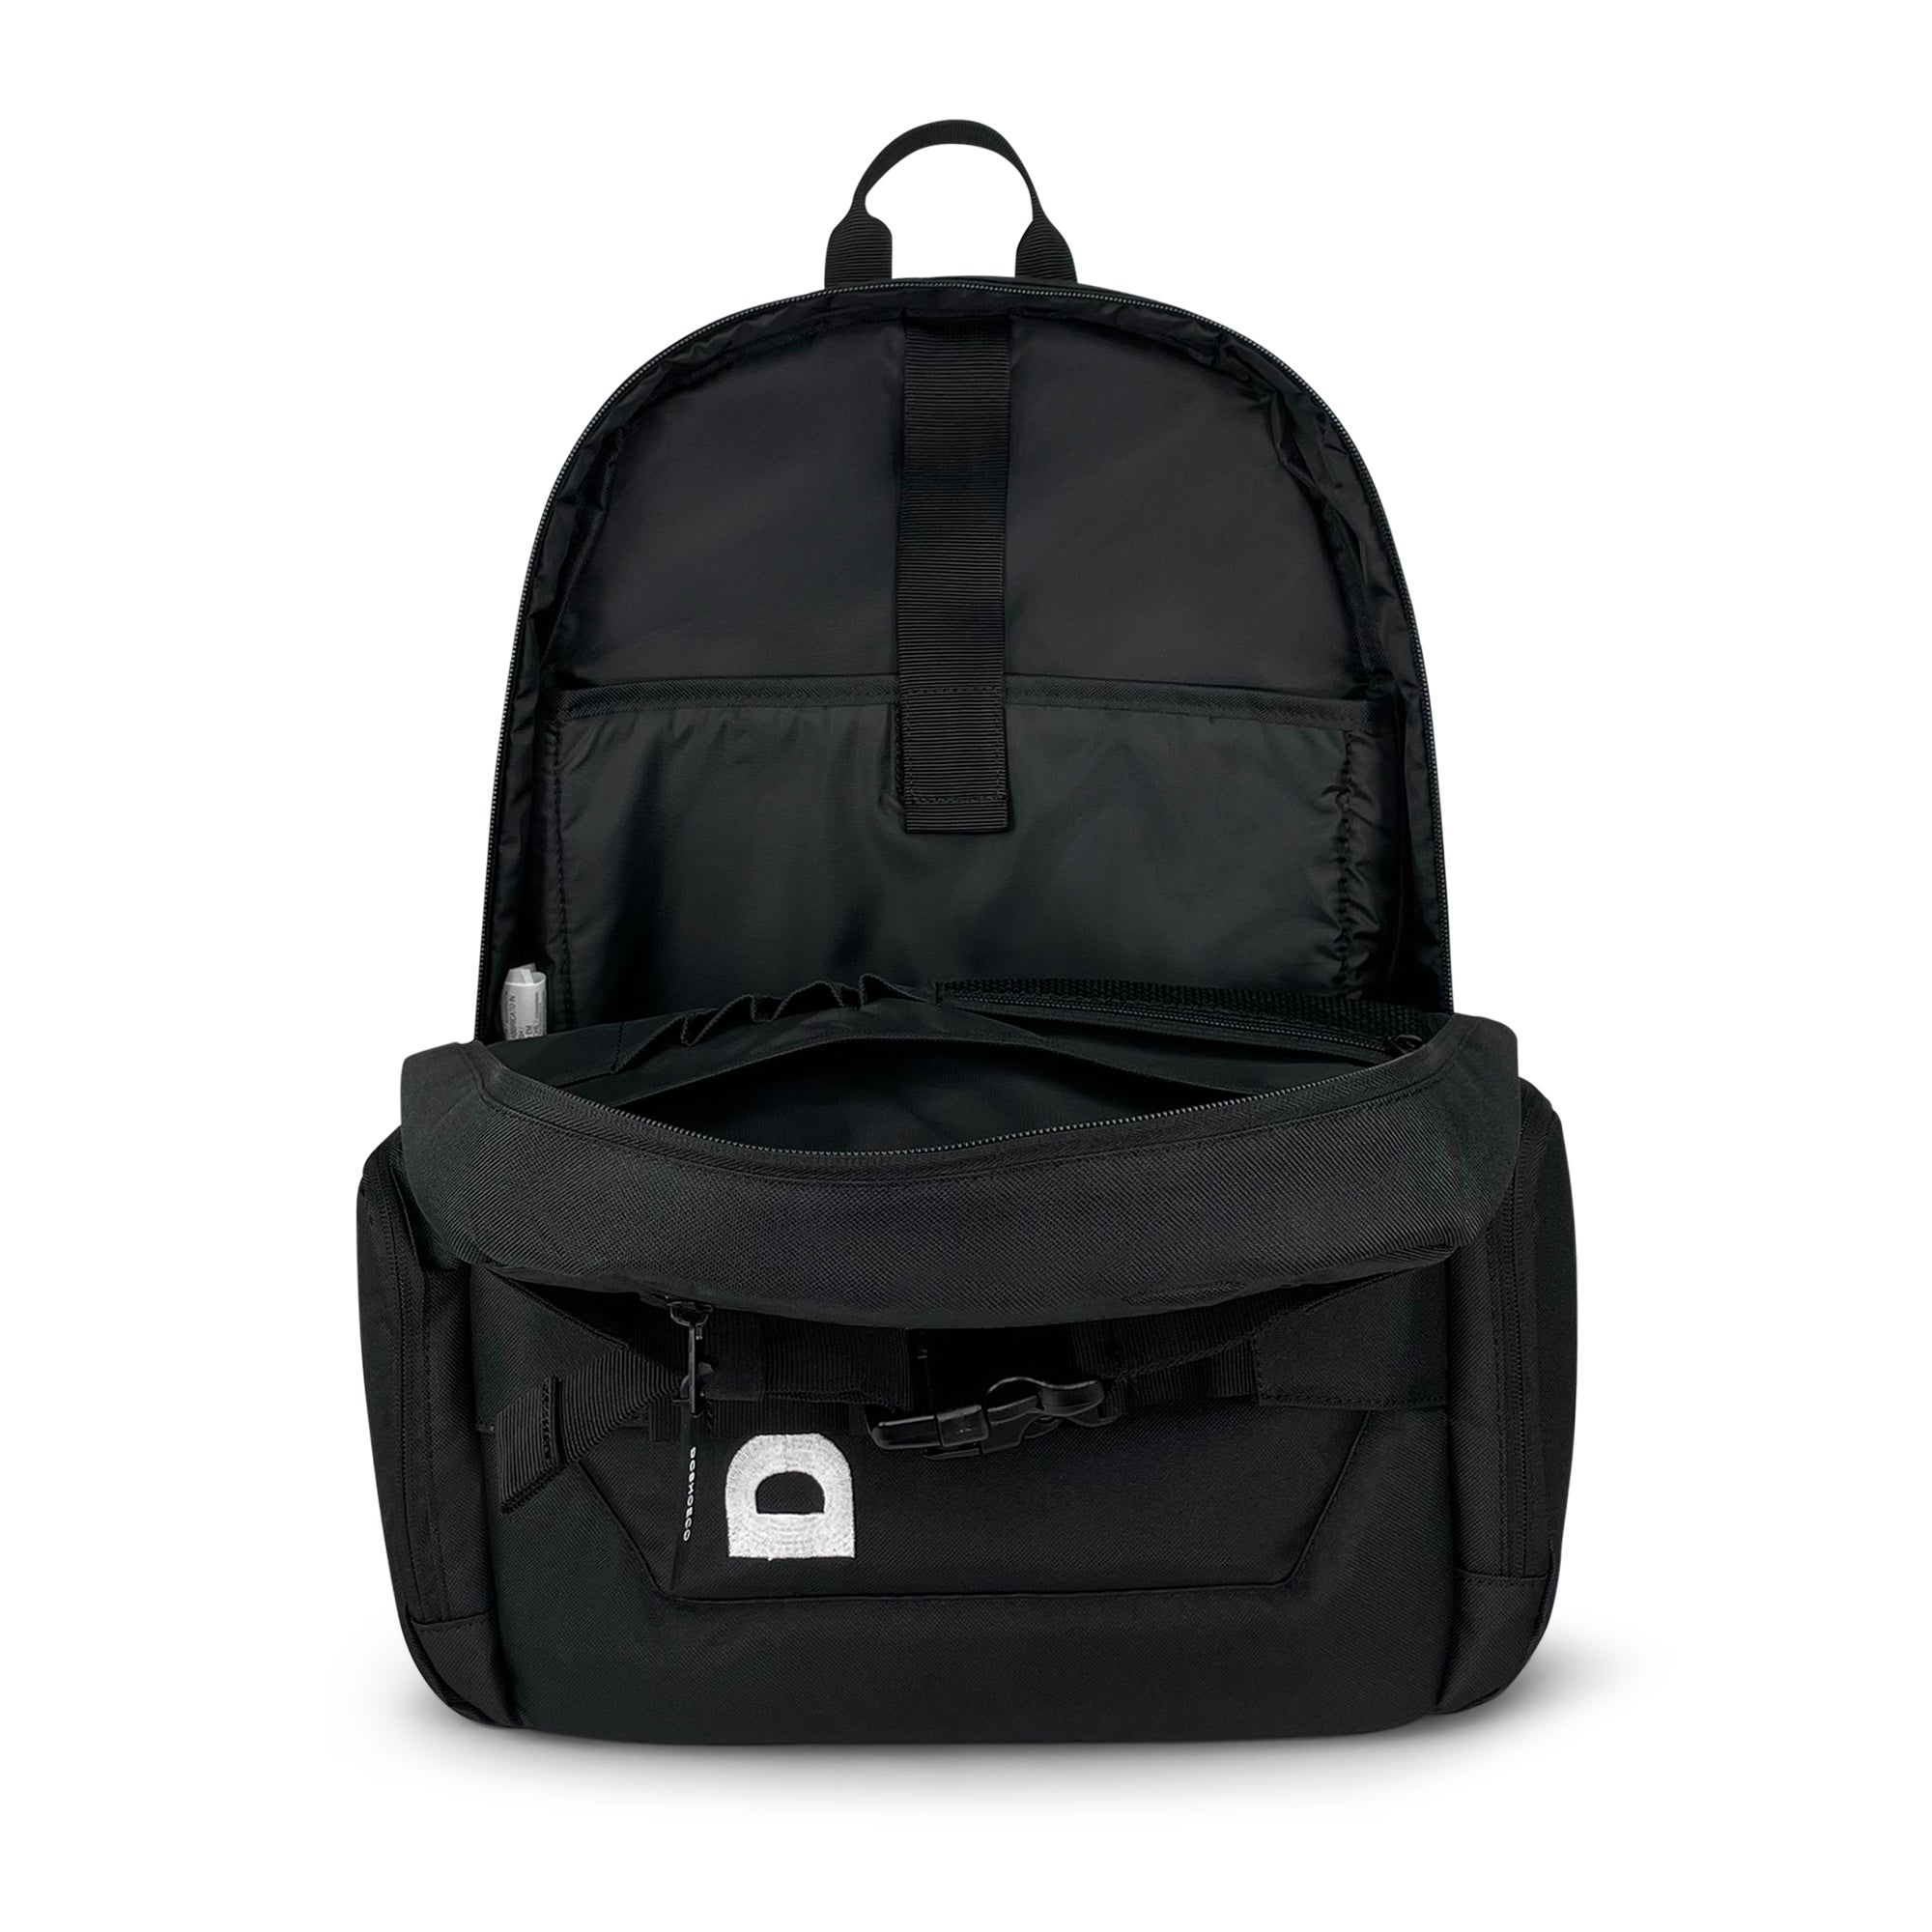 Dc Shoes The Locker - Medium Backpack - Medium Backpack - Men : Amazon.in:  Bags, Wallets and Luggage